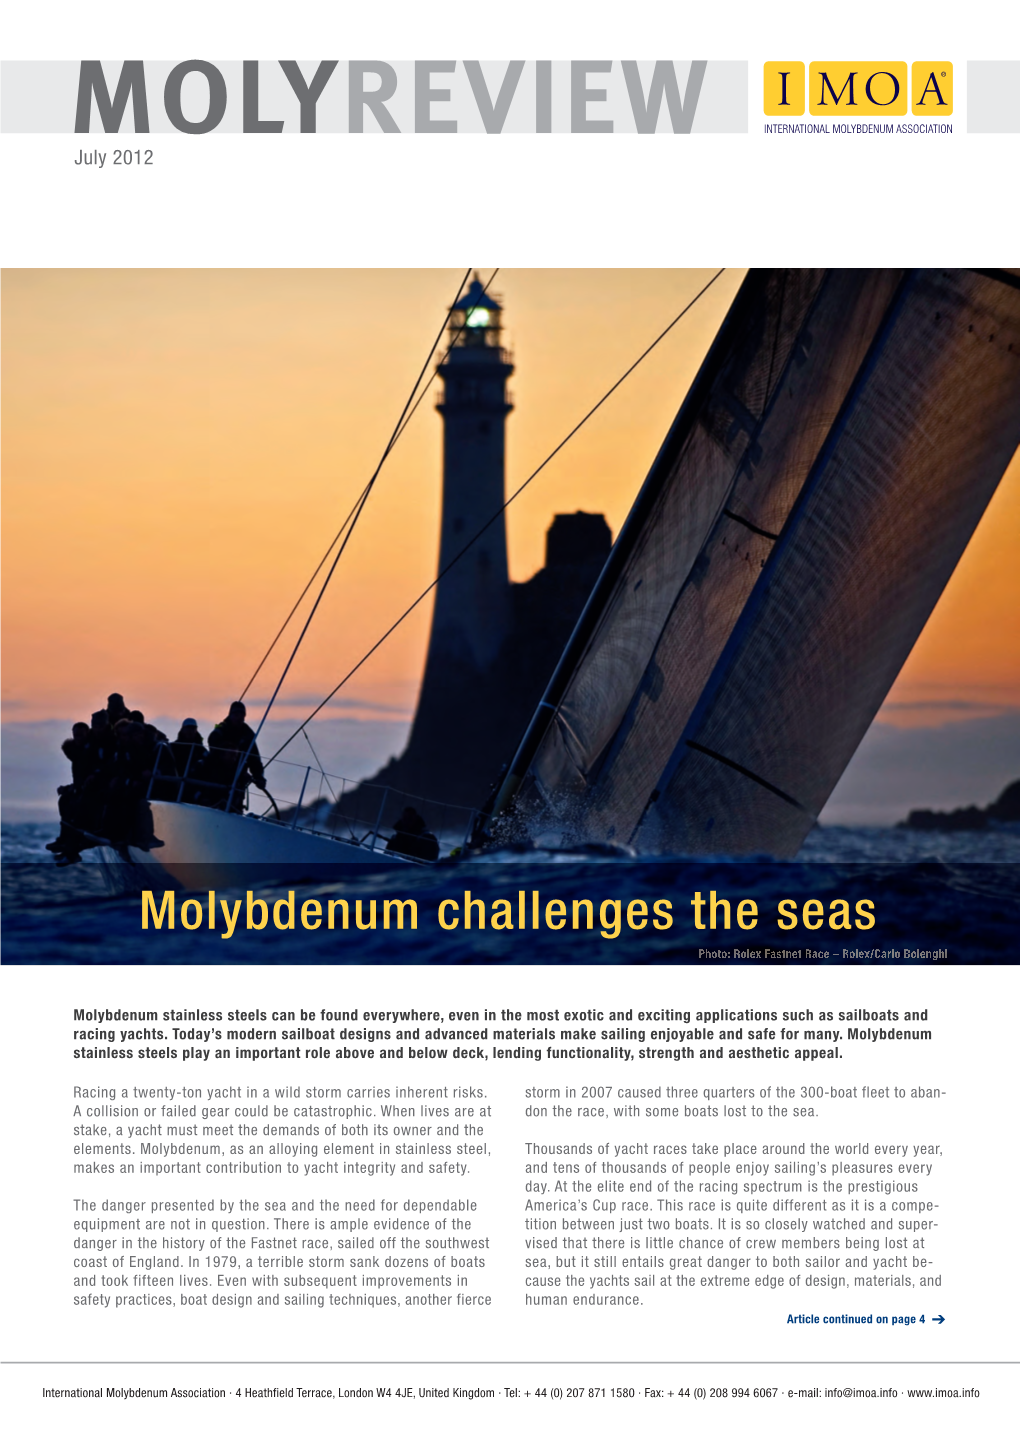 MOLYREVIEW July 2012